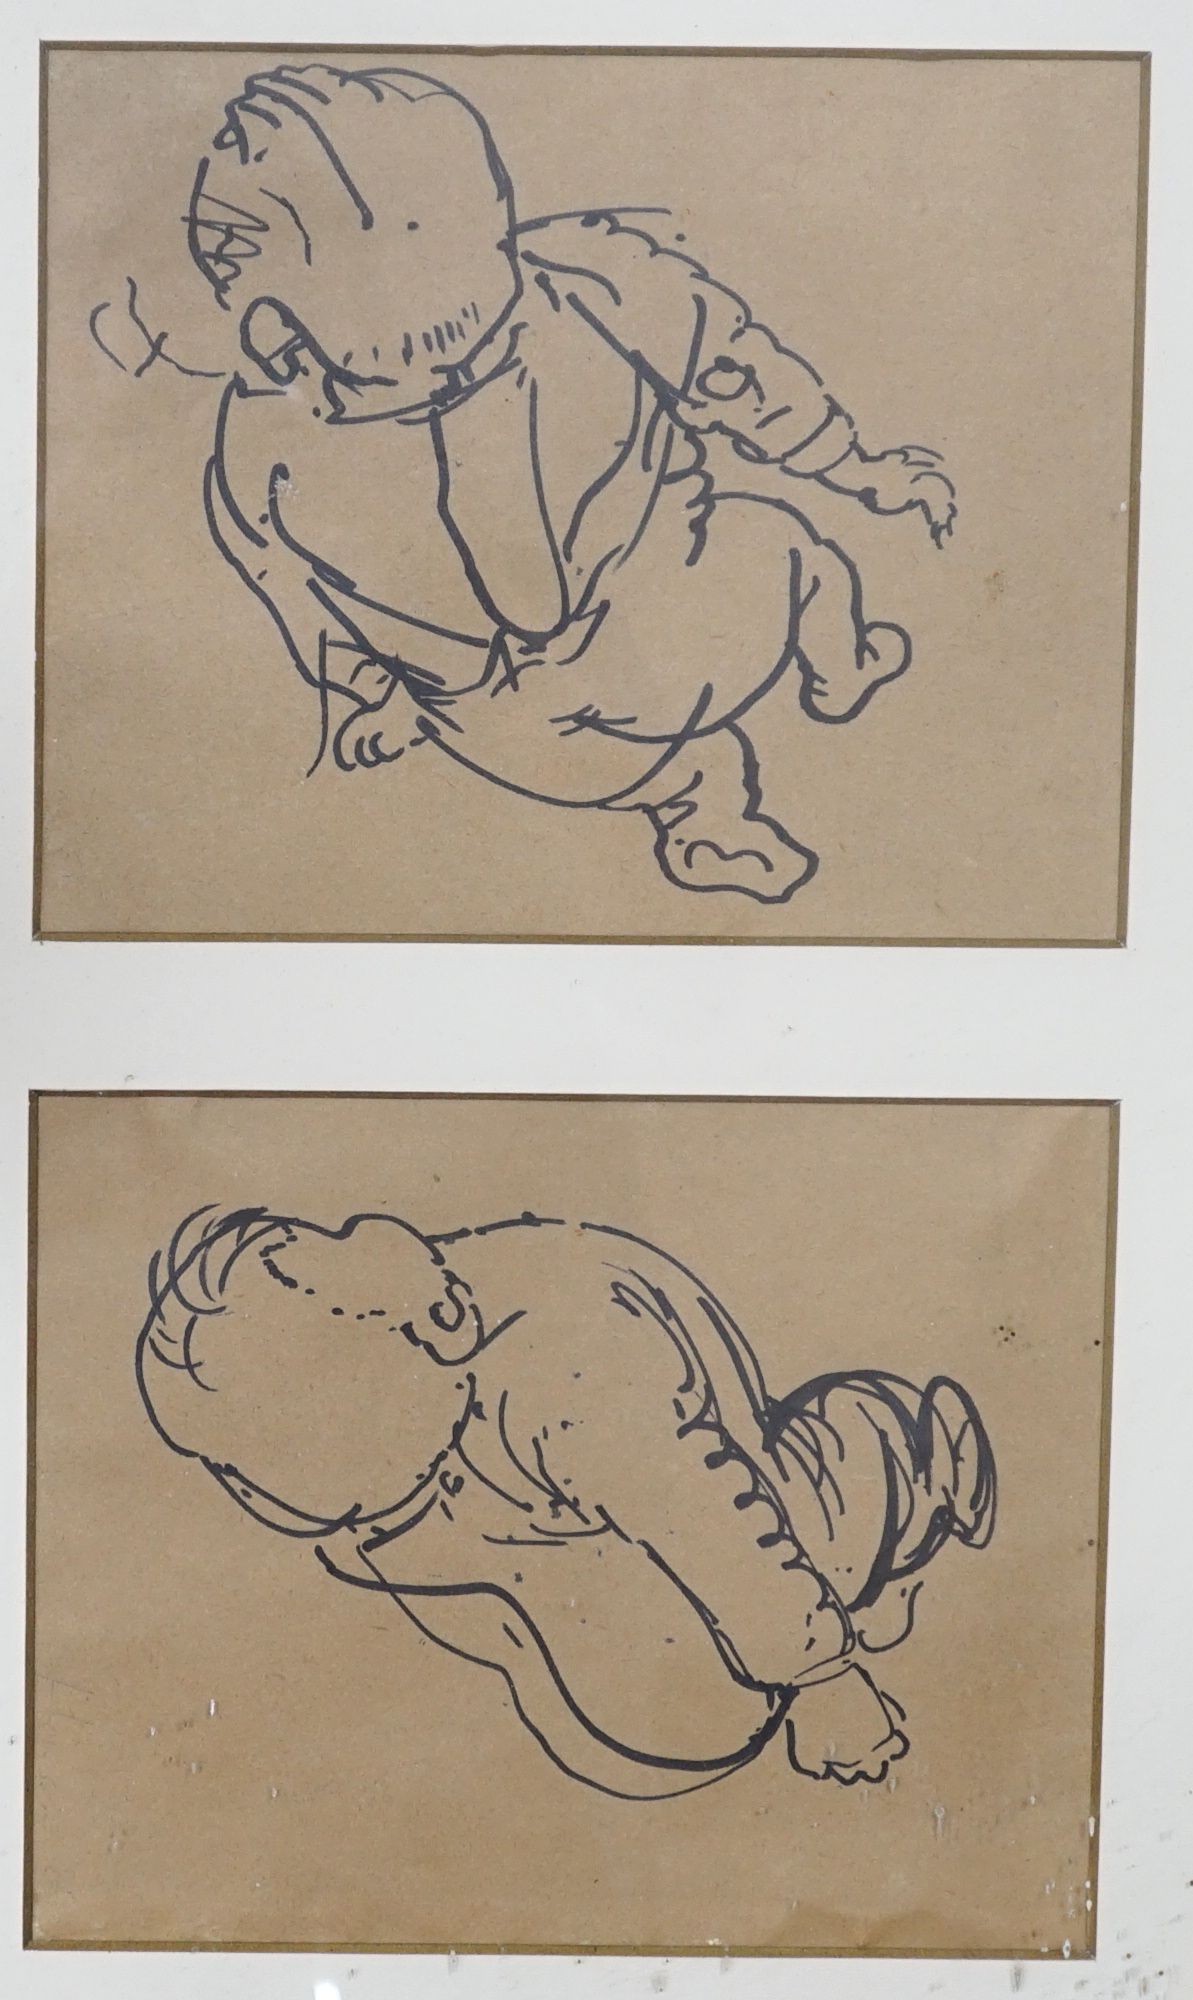 Peter Howson (b.1958), two pen and ink drawings, Studies of an infant, each 26 x 21cm, framed as one.